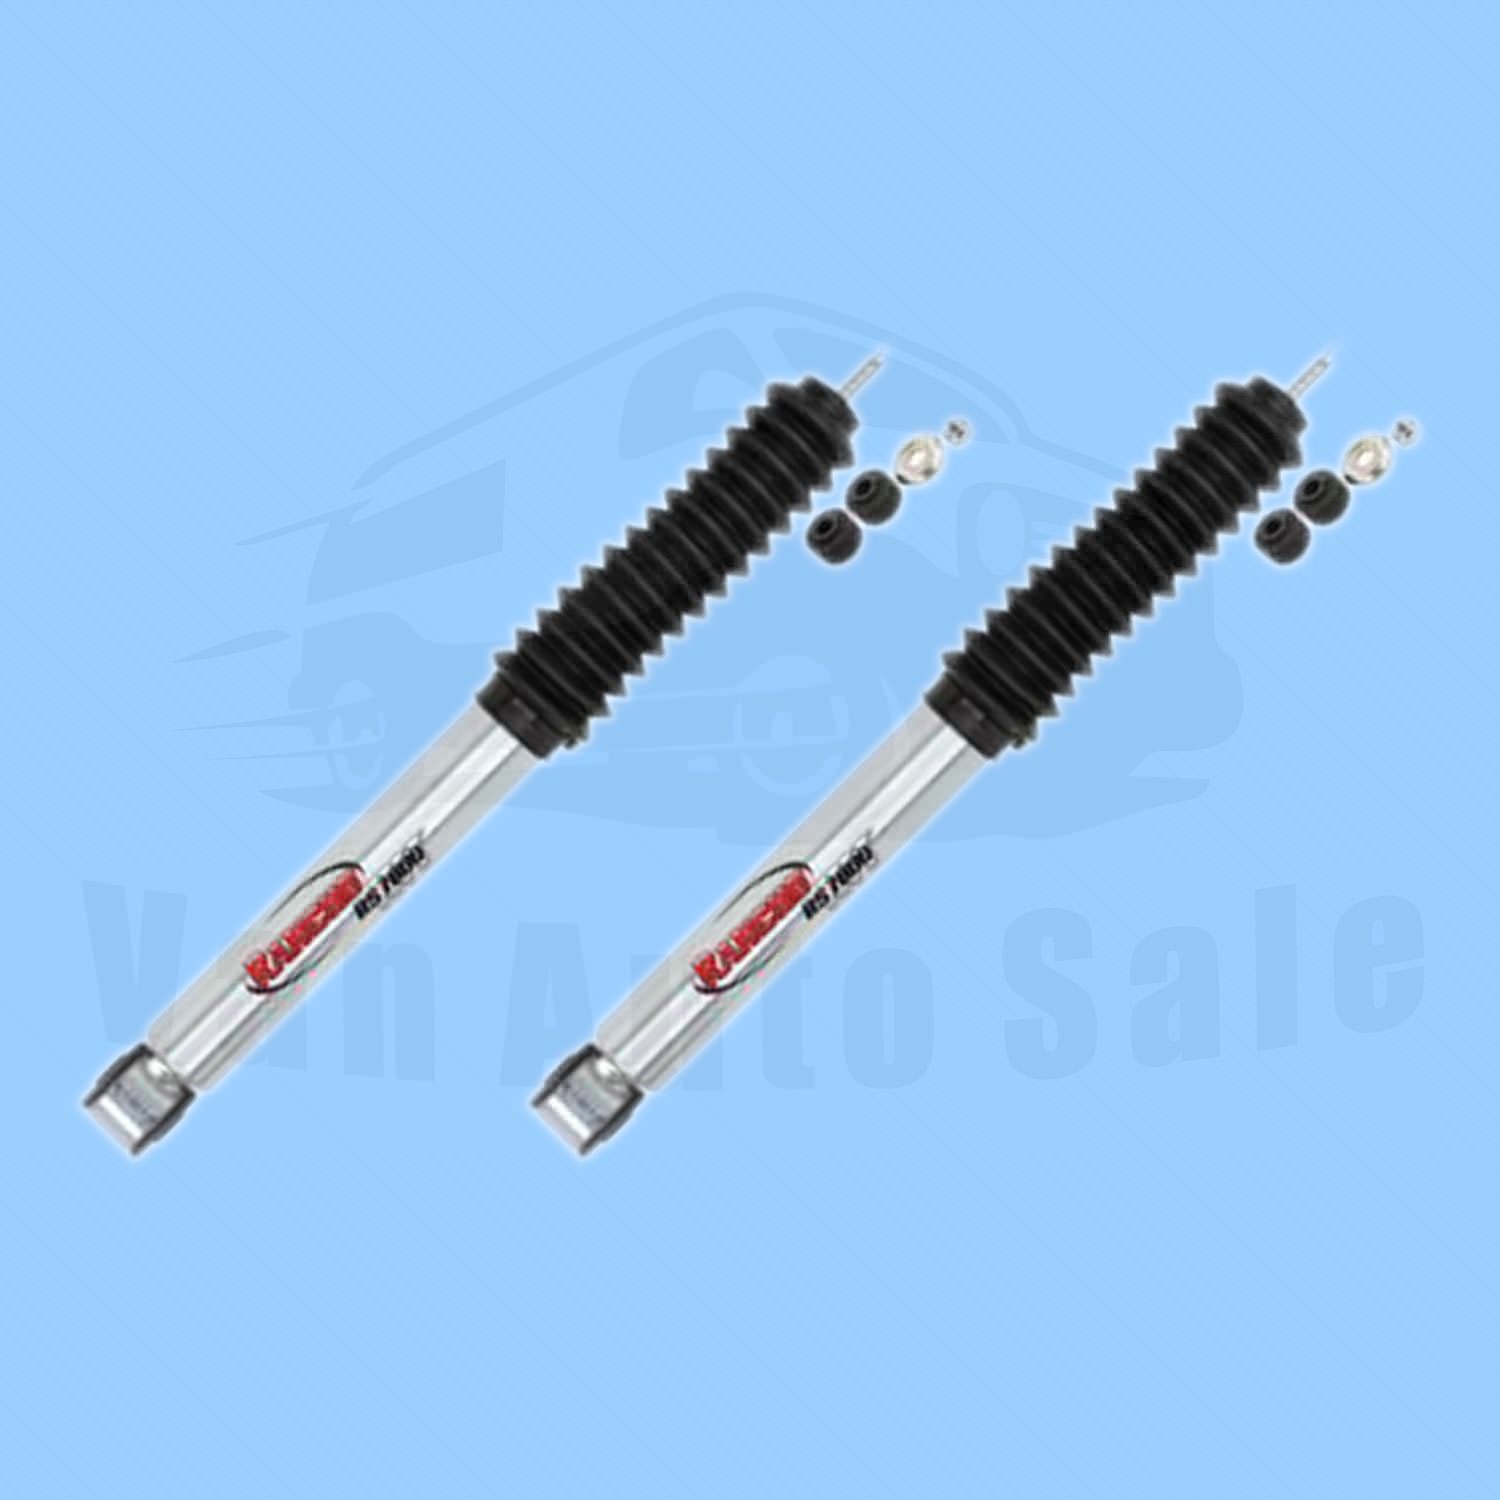 Rancho RS7000MT Front 5-6" Lift Shocks for GMC Sierra 2500HD 2WD 01-10 Best Shocks For Gmc Sierra 2500hd